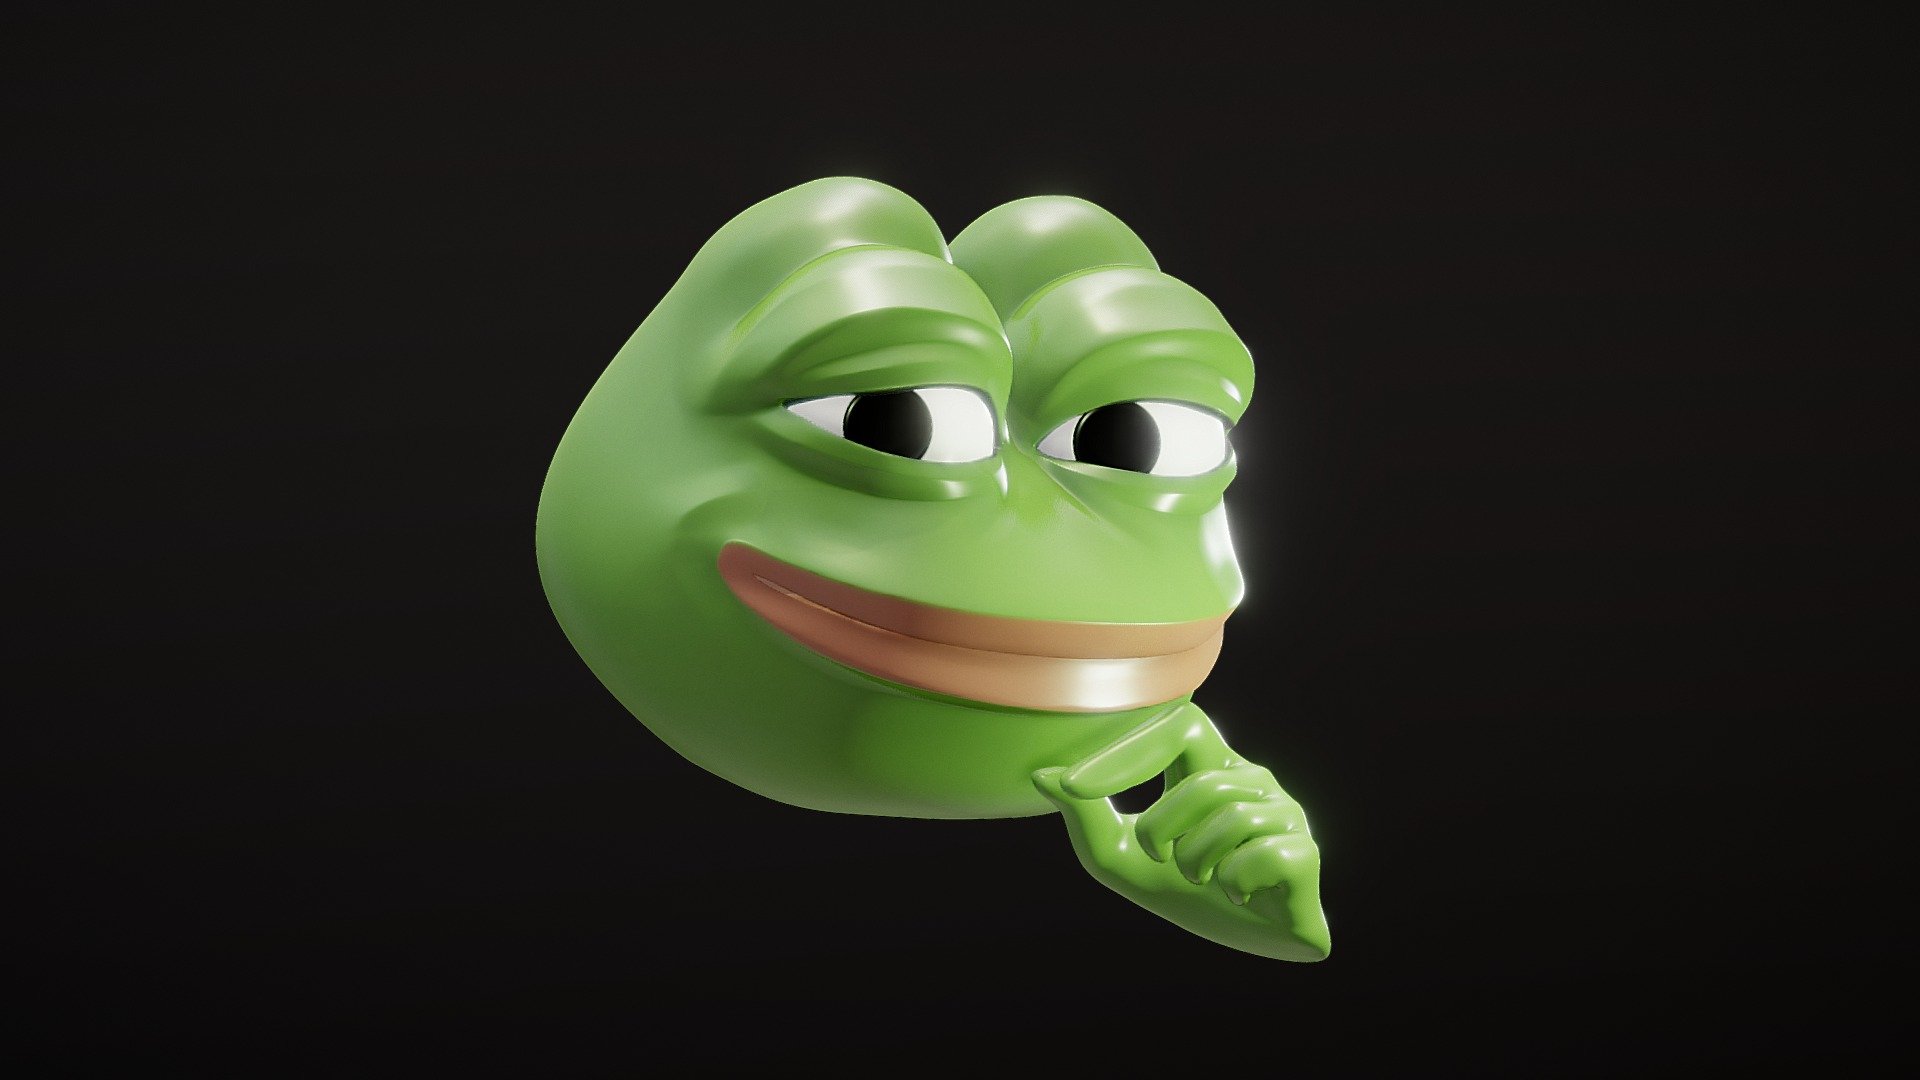 Another Pepe keeping with the aesthetics of the rest of my frogs.

Featuring:




clean topology, smoothable geometry

low-poly and high-poly (sculpted) versions

native Blender 3.0.0 file

4K textures

matching topology with other pepes in my store (can be easily morphed between)

separated eyes, a mouth cavity

“Pepe the Frog is an Internet meme consisting of a green anthropomorphic frog with a humanoid body. Pepe originated in a 2005 comic by Matt Furie called Boy’s Club. It became an Internet meme when its popularity steadily grew across Myspace, Gaia Online and 4chan in 2008. By 2015, it had become one of the most popular memes used on 4chan and Tumblr. Different types of Pepe include “Sad Frog”, “Smug Frog”, “Angry Pepe”, “Feels Frog”, and “You will never…” Frog. Since 2014, ‘rare Pepes’ have been posted on the ‘meme market’ as if they were trading cards.” - Smug Pepe - Buy Royalty Free 3D model by ÆON (@xaeon) 3d model